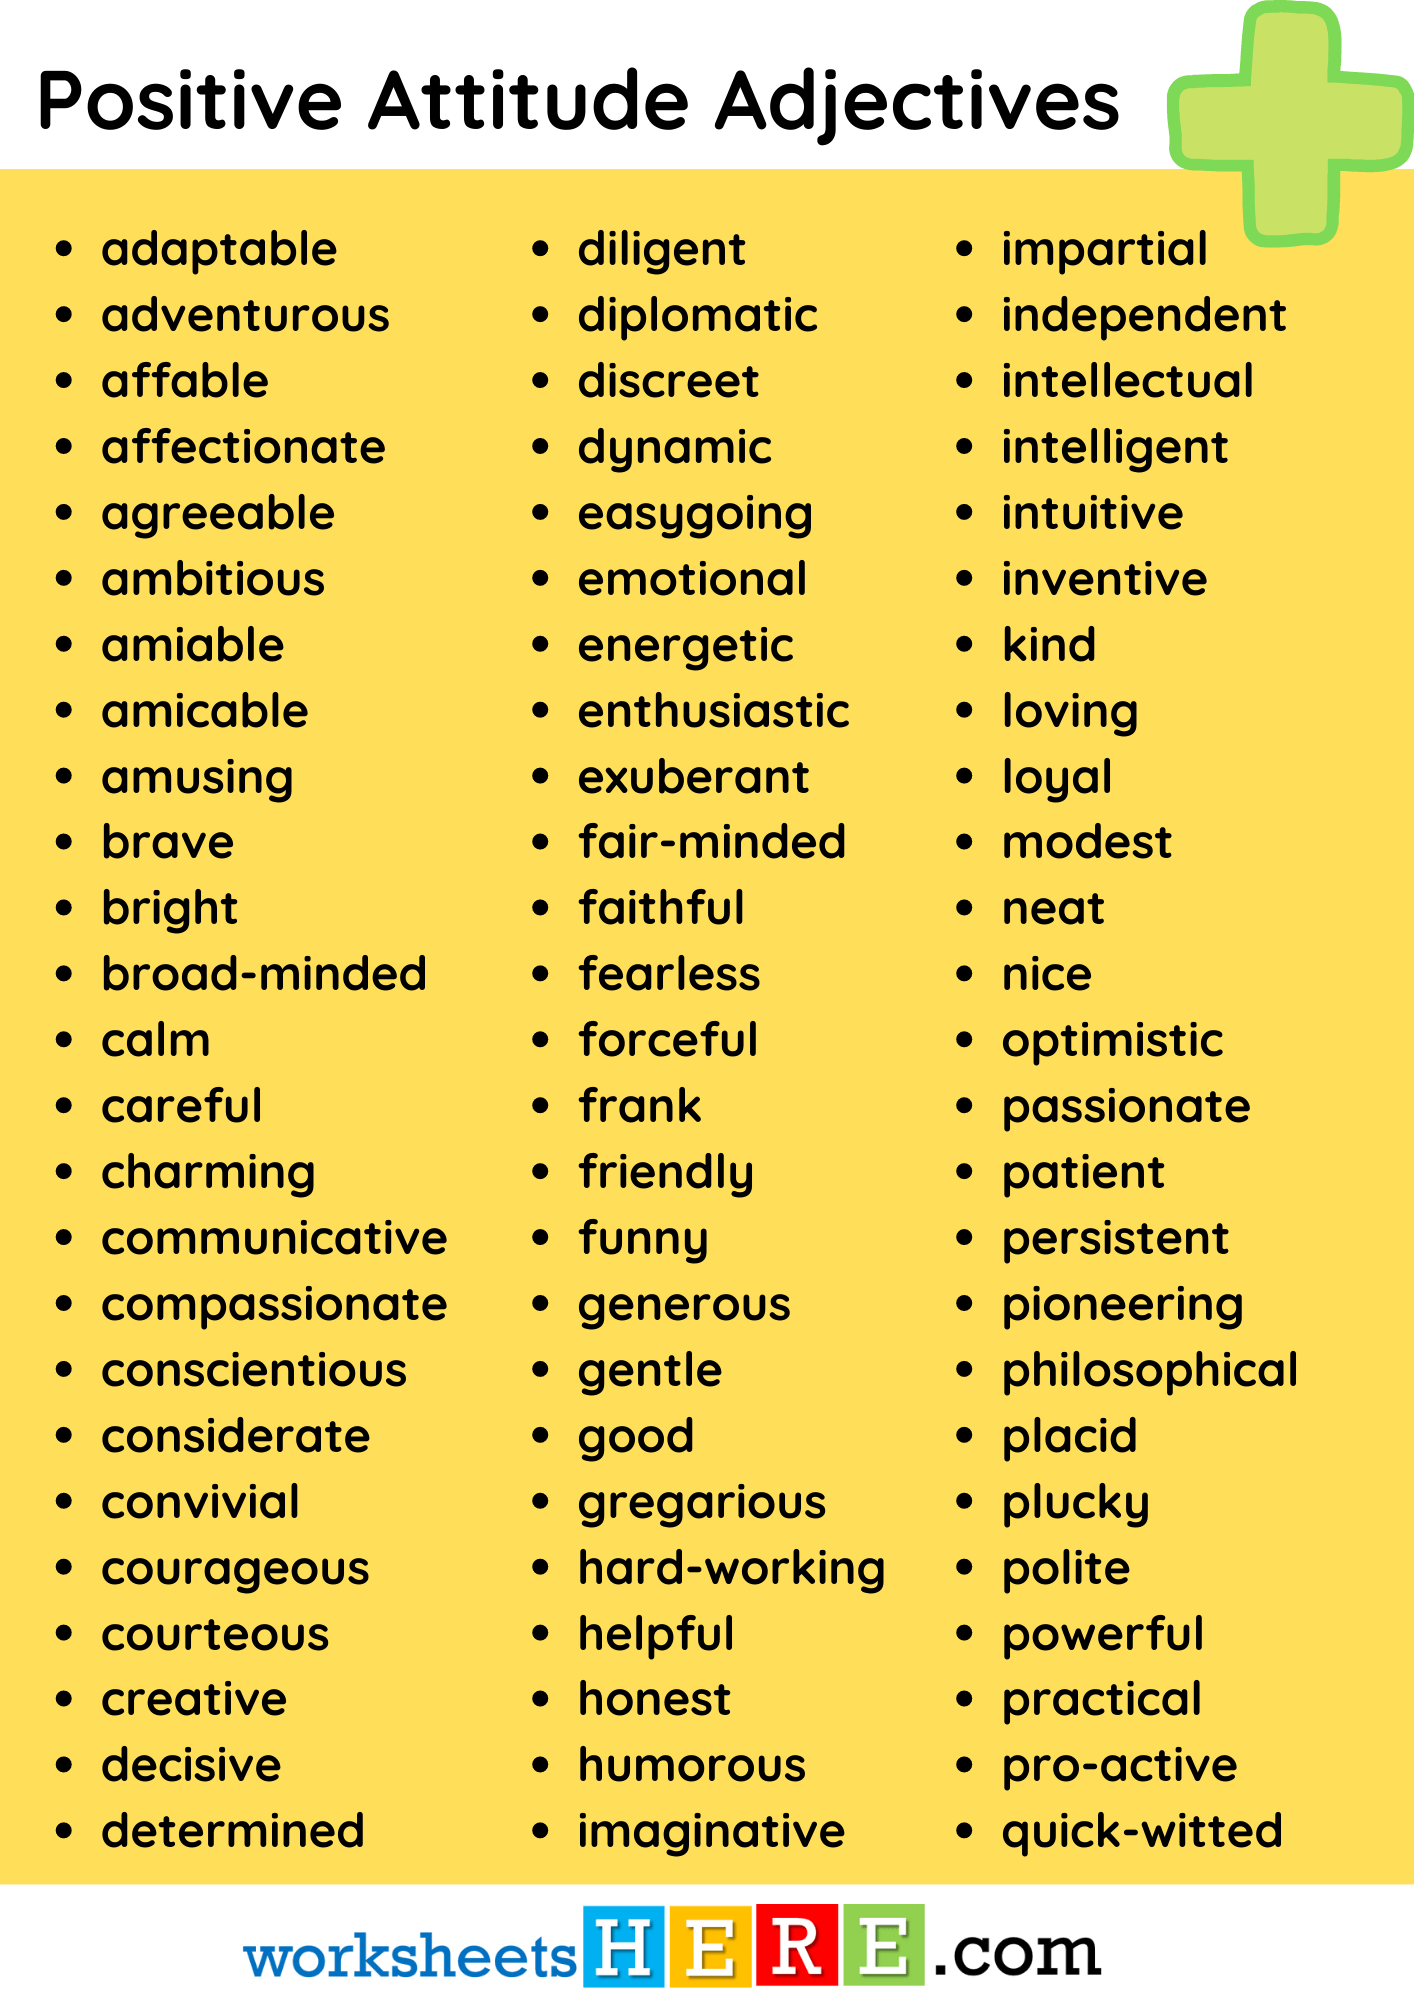 Positive Attitude Adjectives List PDF Worksheet For Student and Kids